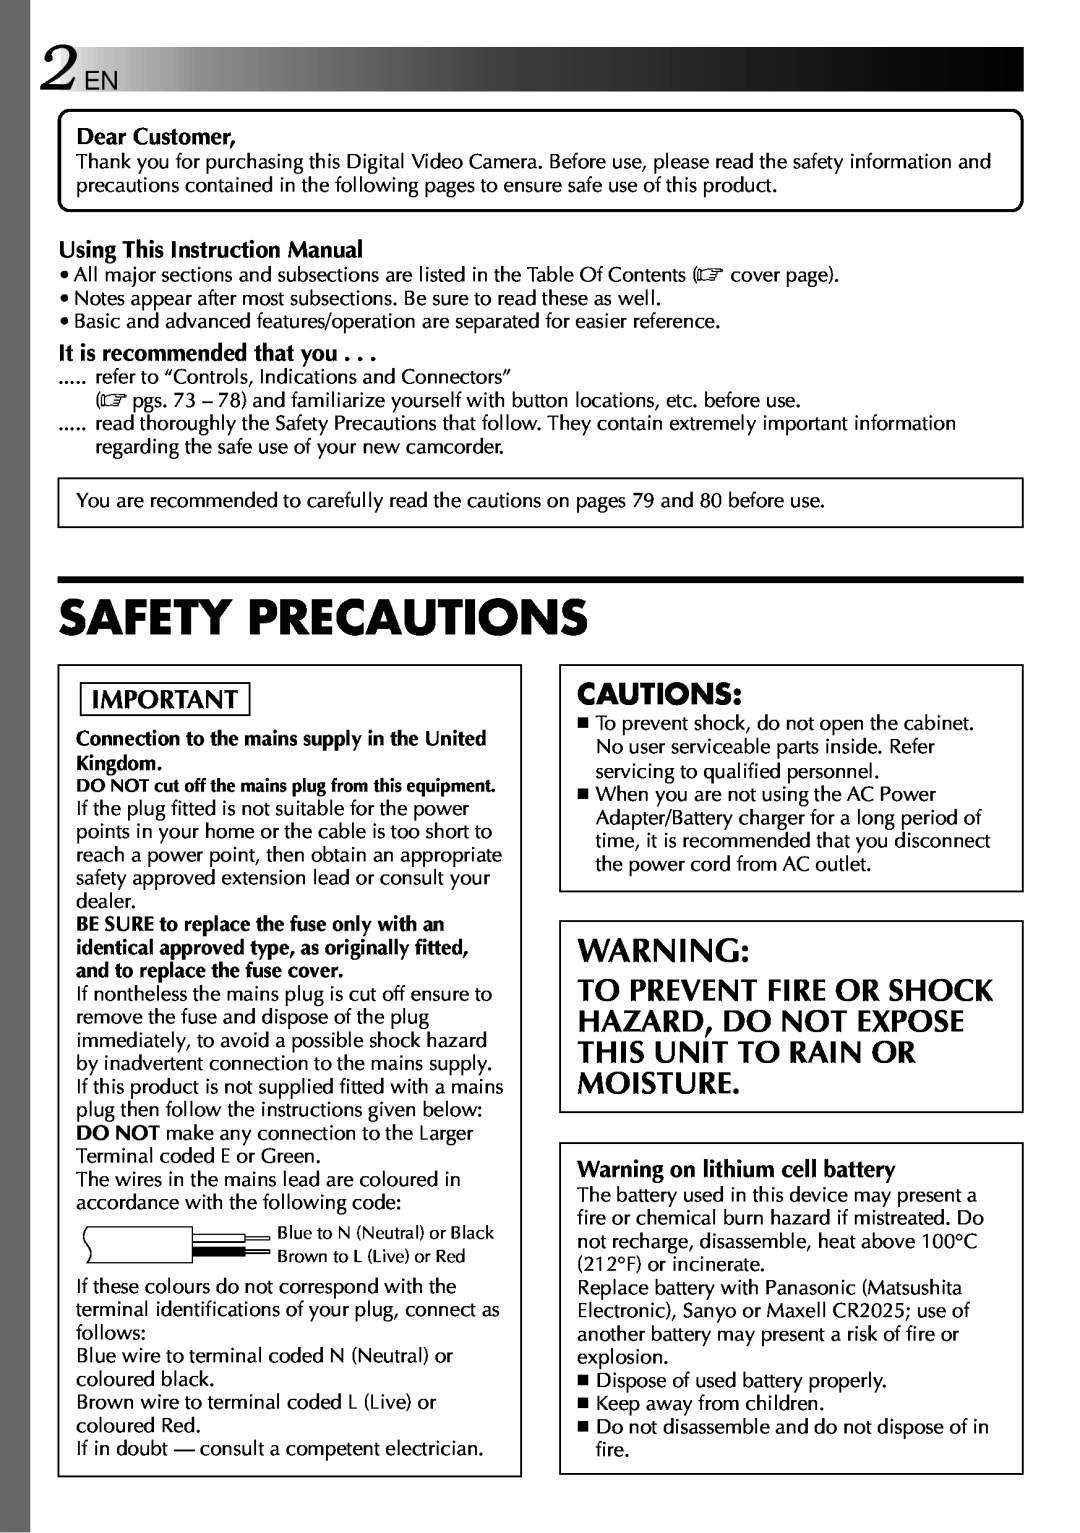 JVC LYT0002-0V4A Cautions, Safety Precautions, Dear Customer, Using This Instruction Manual, It is recommended that you 